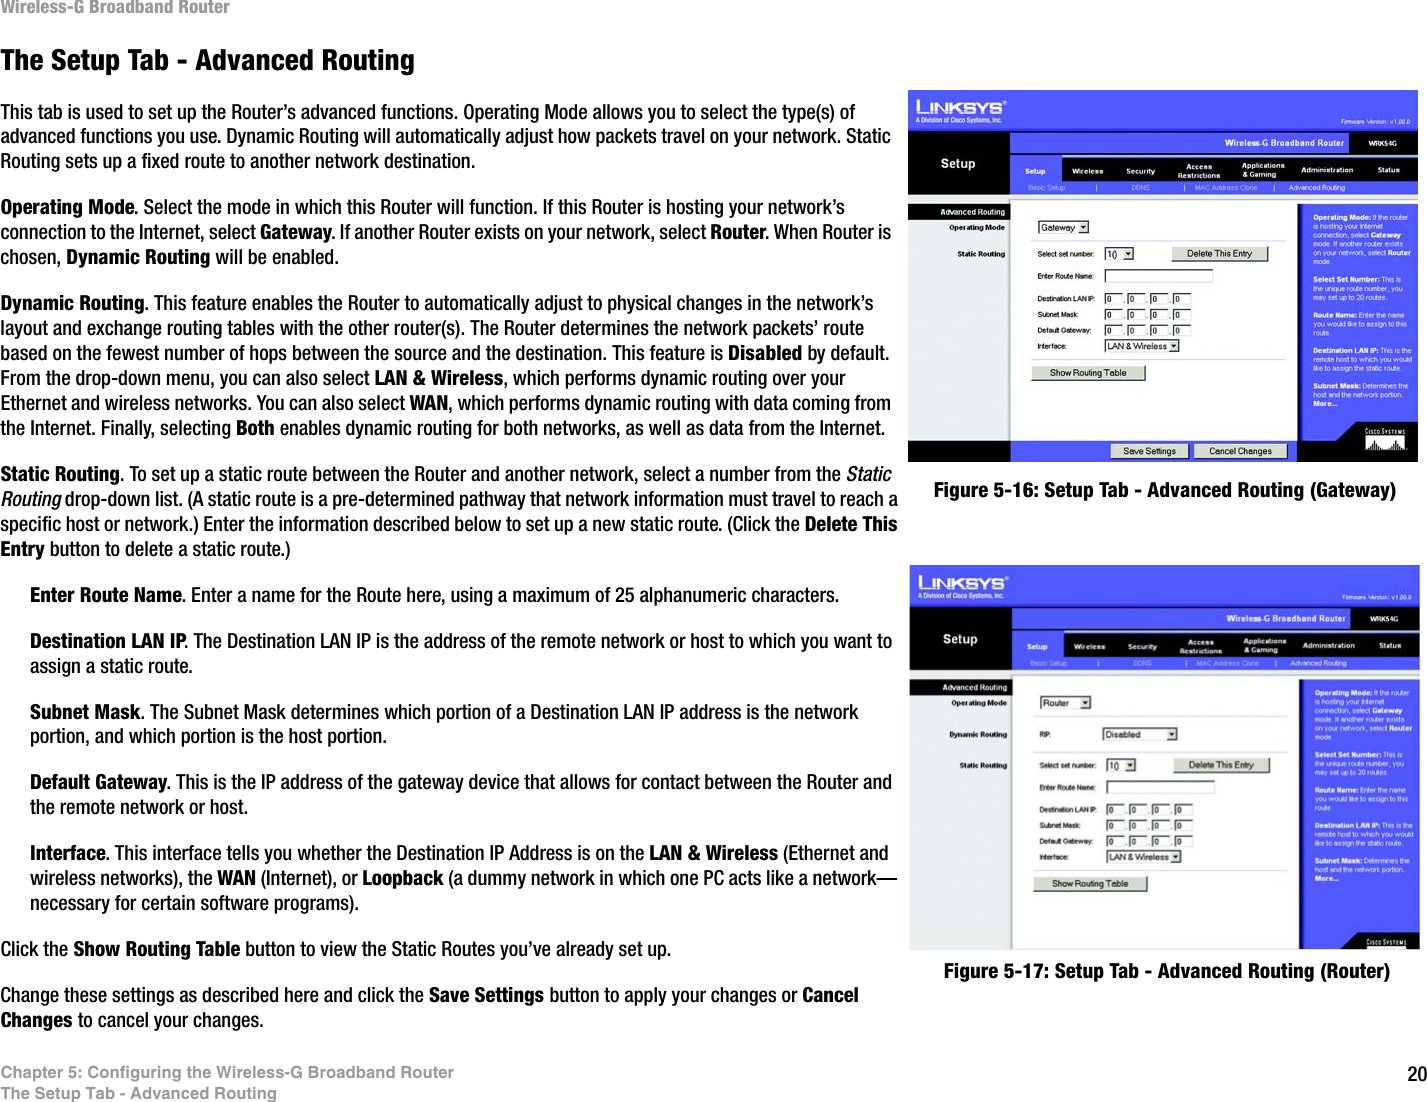 20Chapter 5: Configuring the Wireless-G Broadband RouterThe Setup Tab - Advanced RoutingWireless-G Broadband RouterThe Setup Tab - Advanced RoutingThis tab is used to set up the Router’s advanced functions. Operating Mode allows you to select the type(s) of advanced functions you use. Dynamic Routing will automatically adjust how packets travel on your network. Static Routing sets up a fixed route to another network destination.Operating Mode. Select the mode in which this Router will function. If this Router is hosting your network’s connection to the Internet, select Gateway. If another Router exists on your network, select Router. When Router is chosen, Dynamic Routing will be enabled.Dynamic Routing. This feature enables the Router to automatically adjust to physical changes in the network’s layout and exchange routing tables with the other router(s). The Router determines the network packets’ route based on the fewest number of hops between the source and the destination. This feature is Disabled by default. From the drop-down menu, you can also select LAN &amp; Wireless, which performs dynamic routing over your Ethernet and wireless networks. You can also select WAN, which performs dynamic routing with data coming from the Internet. Finally, selecting Both enables dynamic routing for both networks, as well as data from the Internet.Static Routing. To set up a static route between the Router and another network, select a number from the Static Routing drop-down list. (A static route is a pre-determined pathway that network information must travel to reach a specific host or network.) Enter the information described below to set up a new static route. (Click the Delete This Entry button to delete a static route.)Enter Route Name. Enter a name for the Route here, using a maximum of 25 alphanumeric characters.Destination LAN IP. The Destination LAN IP is the address of the remote network or host to which you want to assign a static route.Subnet Mask. The Subnet Mask determines which portion of a Destination LAN IP address is the network portion, and which portion is the host portion. Default Gateway. This is the IP address of the gateway device that allows for contact between the Router and the remote network or host.Interface. This interface tells you whether the Destination IP Address is on the LAN &amp; Wireless (Ethernet and wireless networks), the WAN (Internet), or Loopback (a dummy network in which one PC acts like a network—necessary for certain software programs). Click the Show Routing Table button to view the Static Routes you’ve already set up.Change these settings as described here and click the Save Settings button to apply your changes or Cancel Changes to cancel your changes.Figure 5-17: Setup Tab - Advanced Routing (Router)Figure 5-16: Setup Tab - Advanced Routing (Gateway)